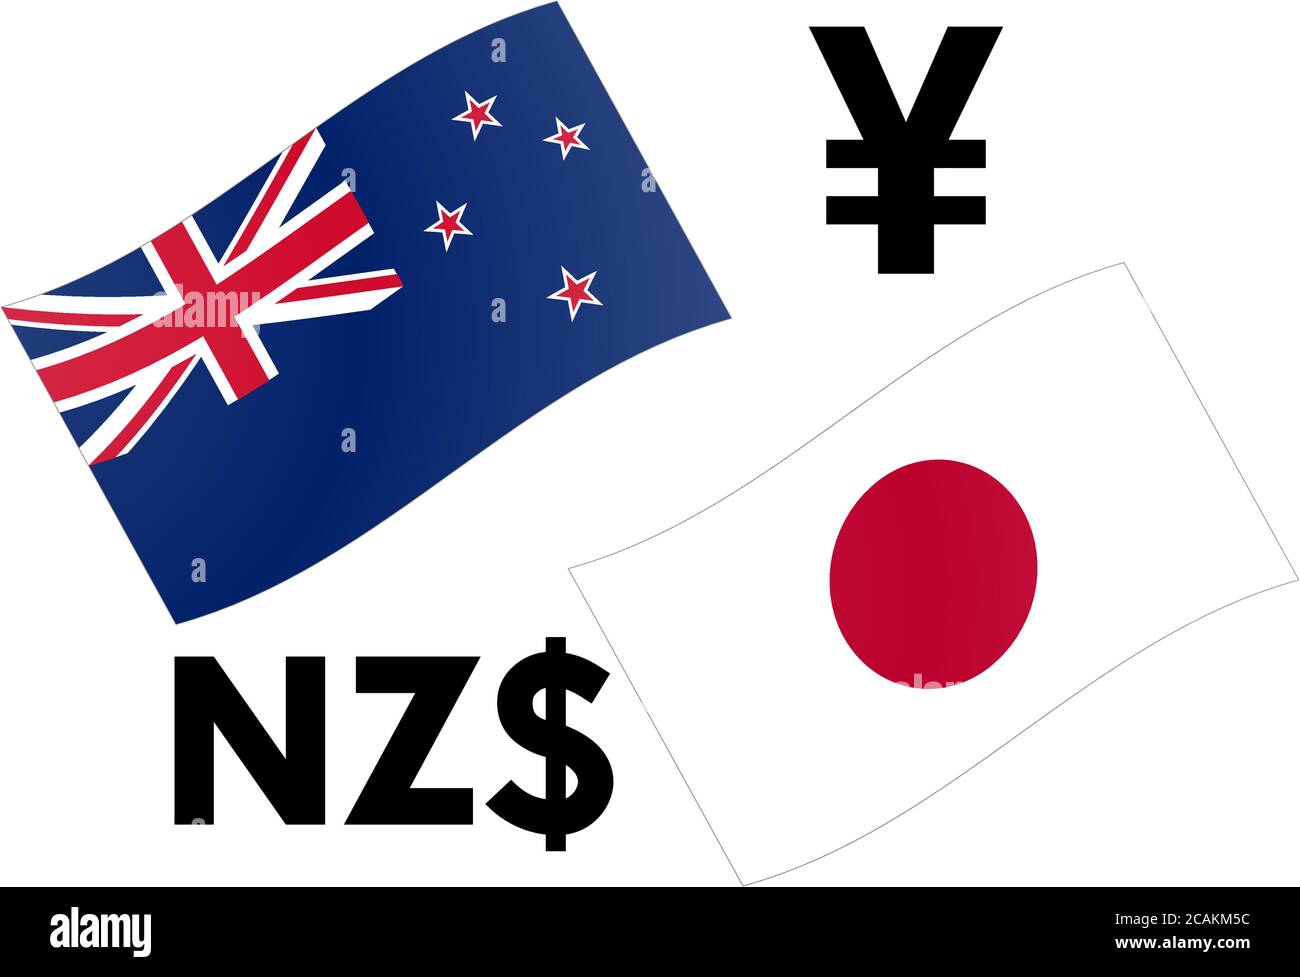 NZDJPY forex currency pair vector illustration. New Zealand and Japanese flag, with Dollar and Yen symbol. Stock Vector